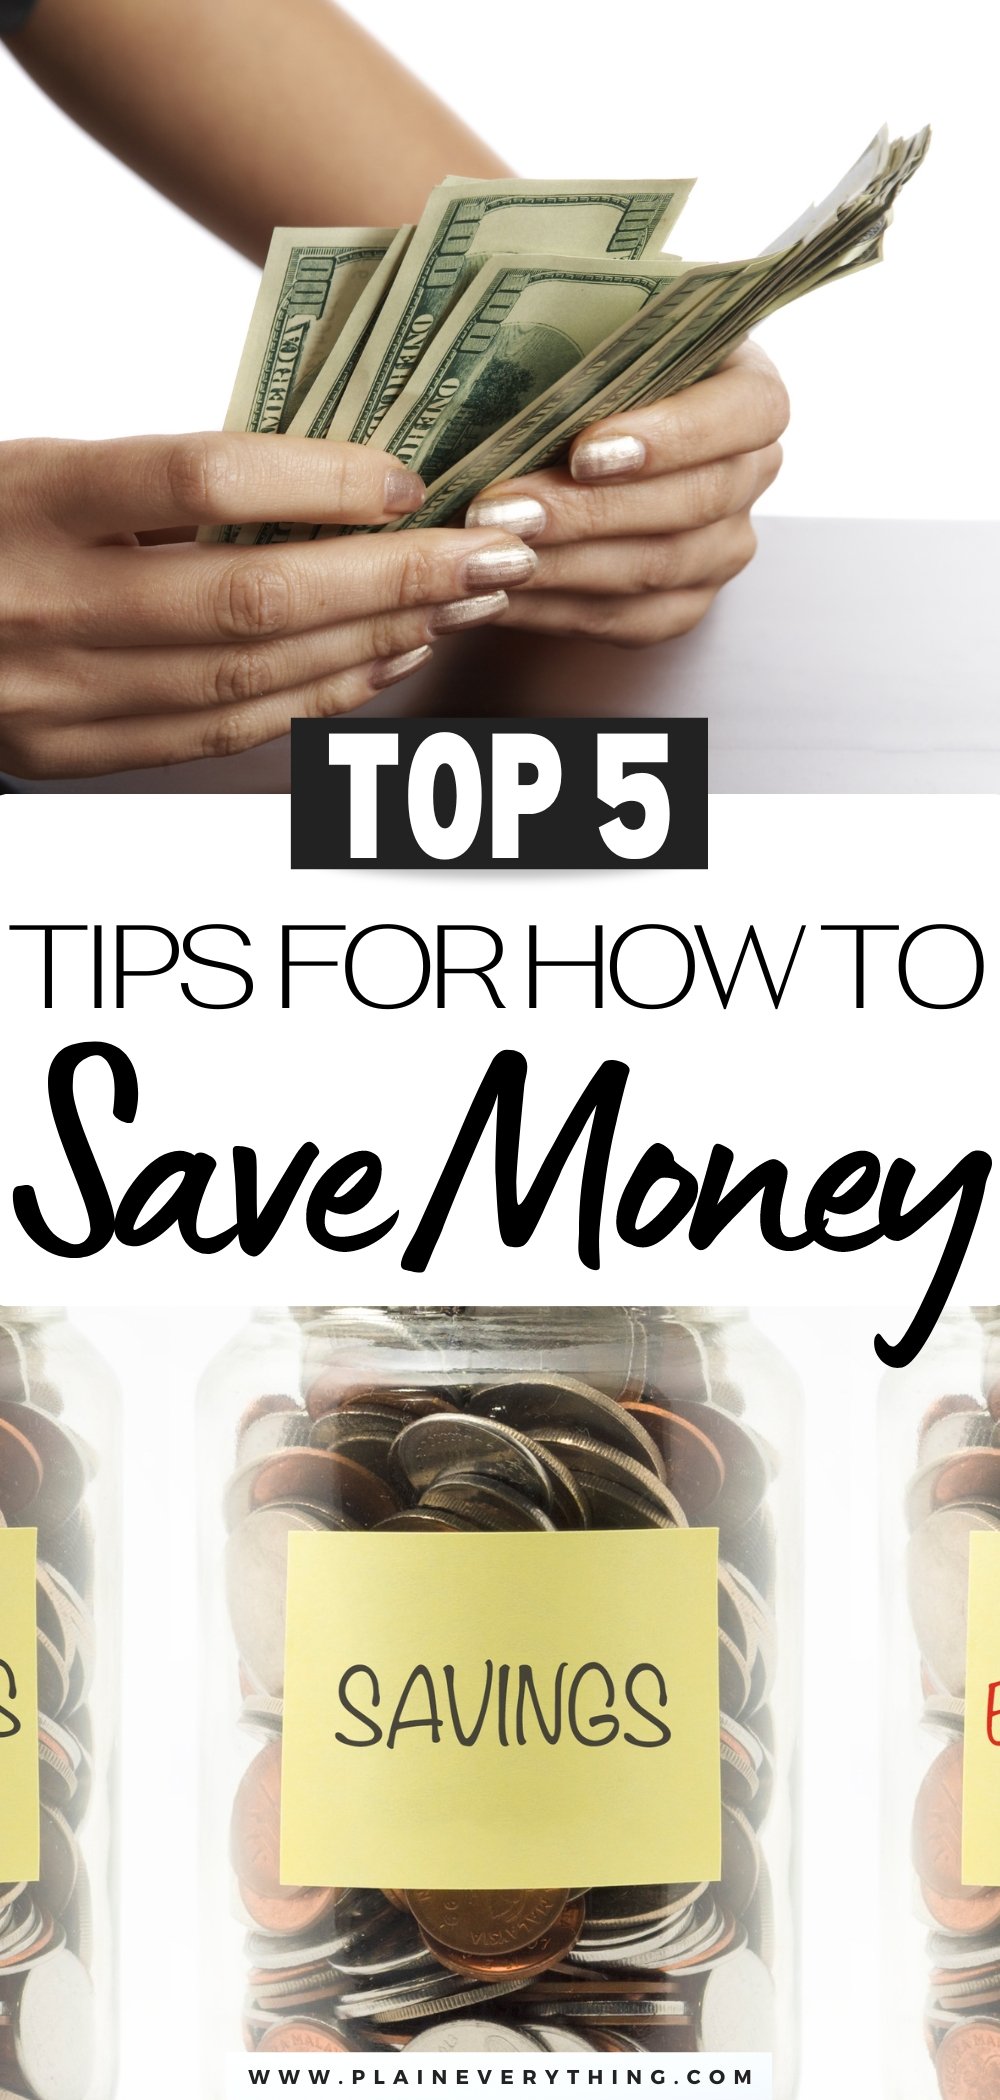 Top 5 Tips On How To Save Money